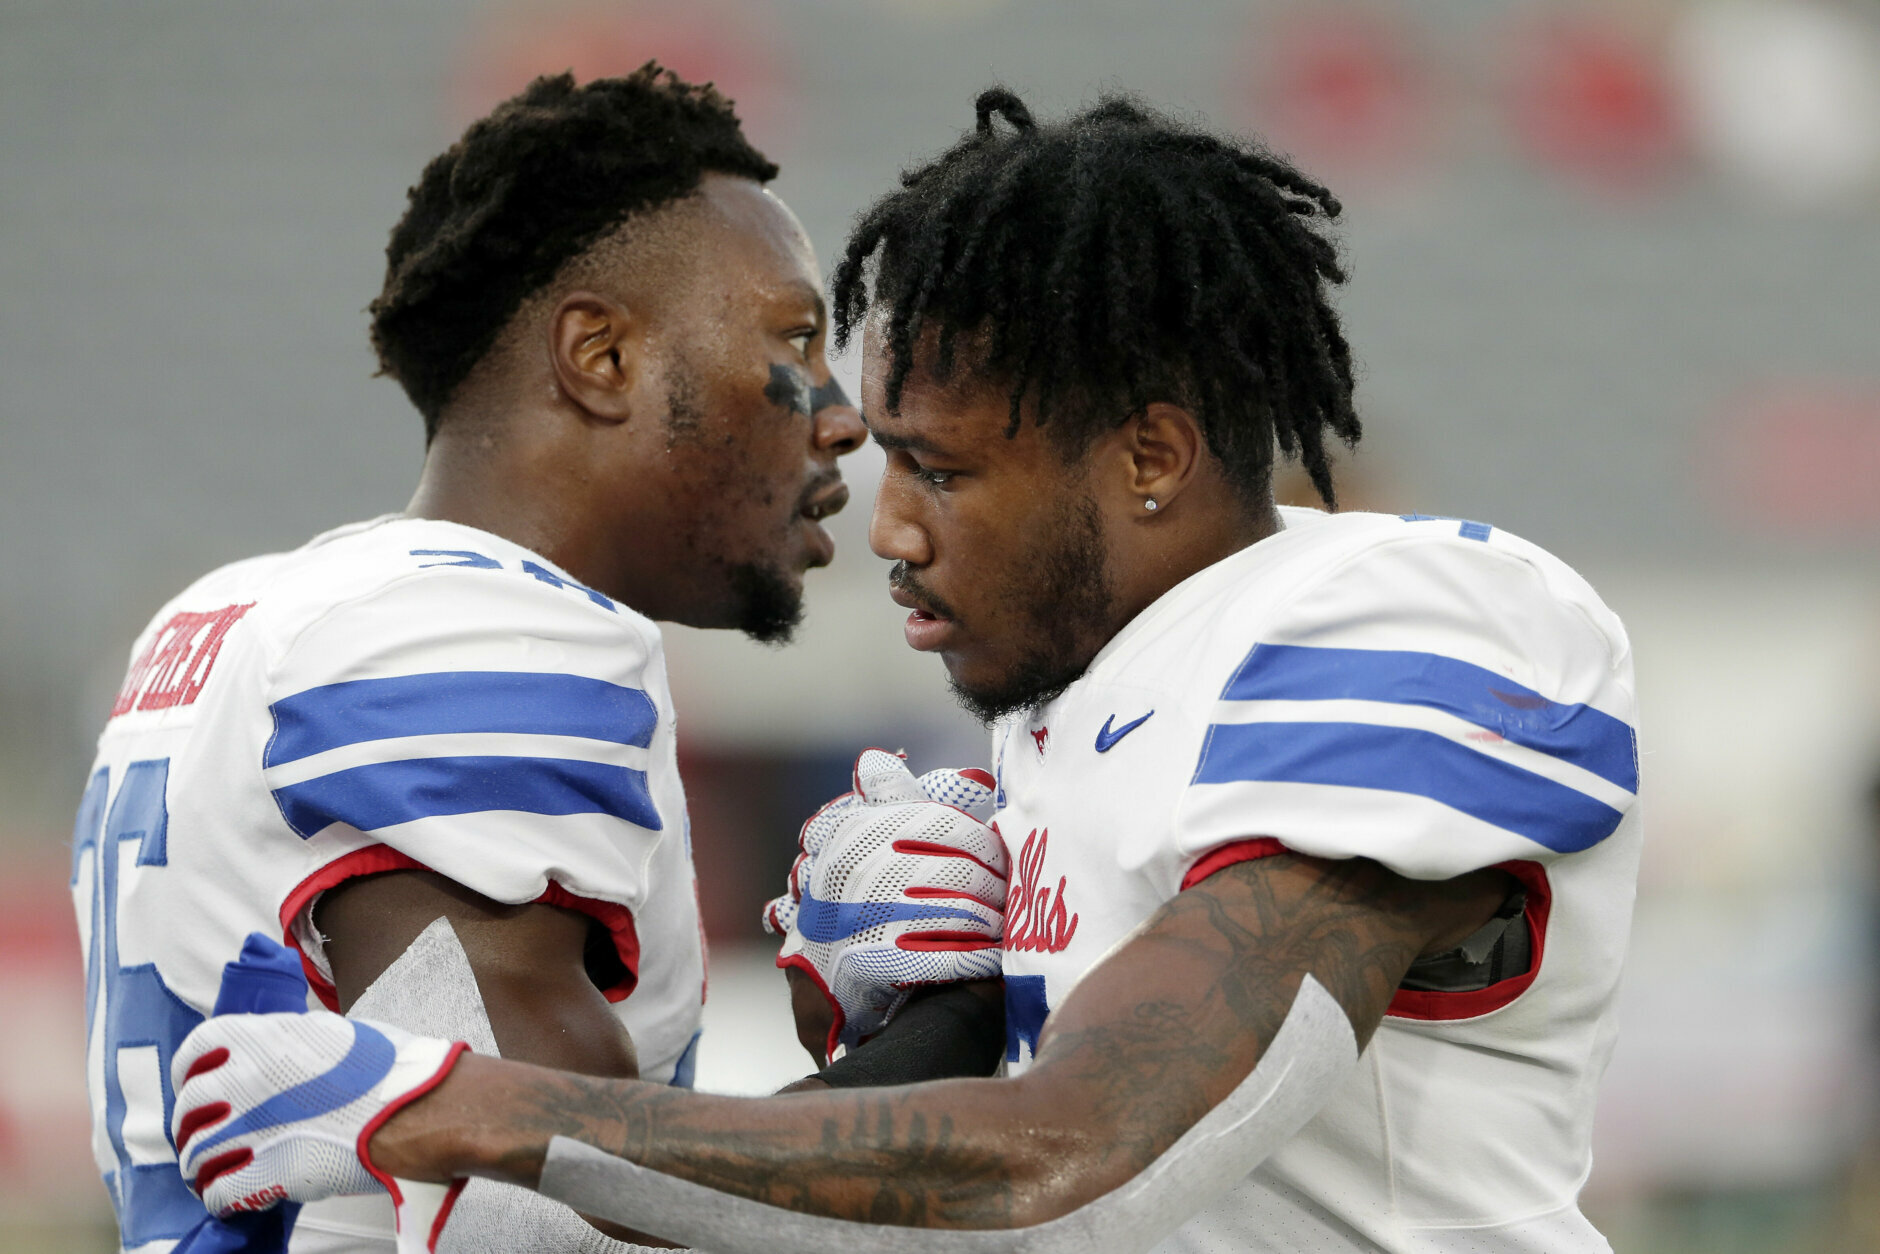 SMU defensive back Brandon Stephens, left, and SMU cornerback Robert Hayes Jr., right, shake hands before an NCAA college football game Thursday, Oct. 24, 2019, in Houston. (AP Photo/Michael Wyke)